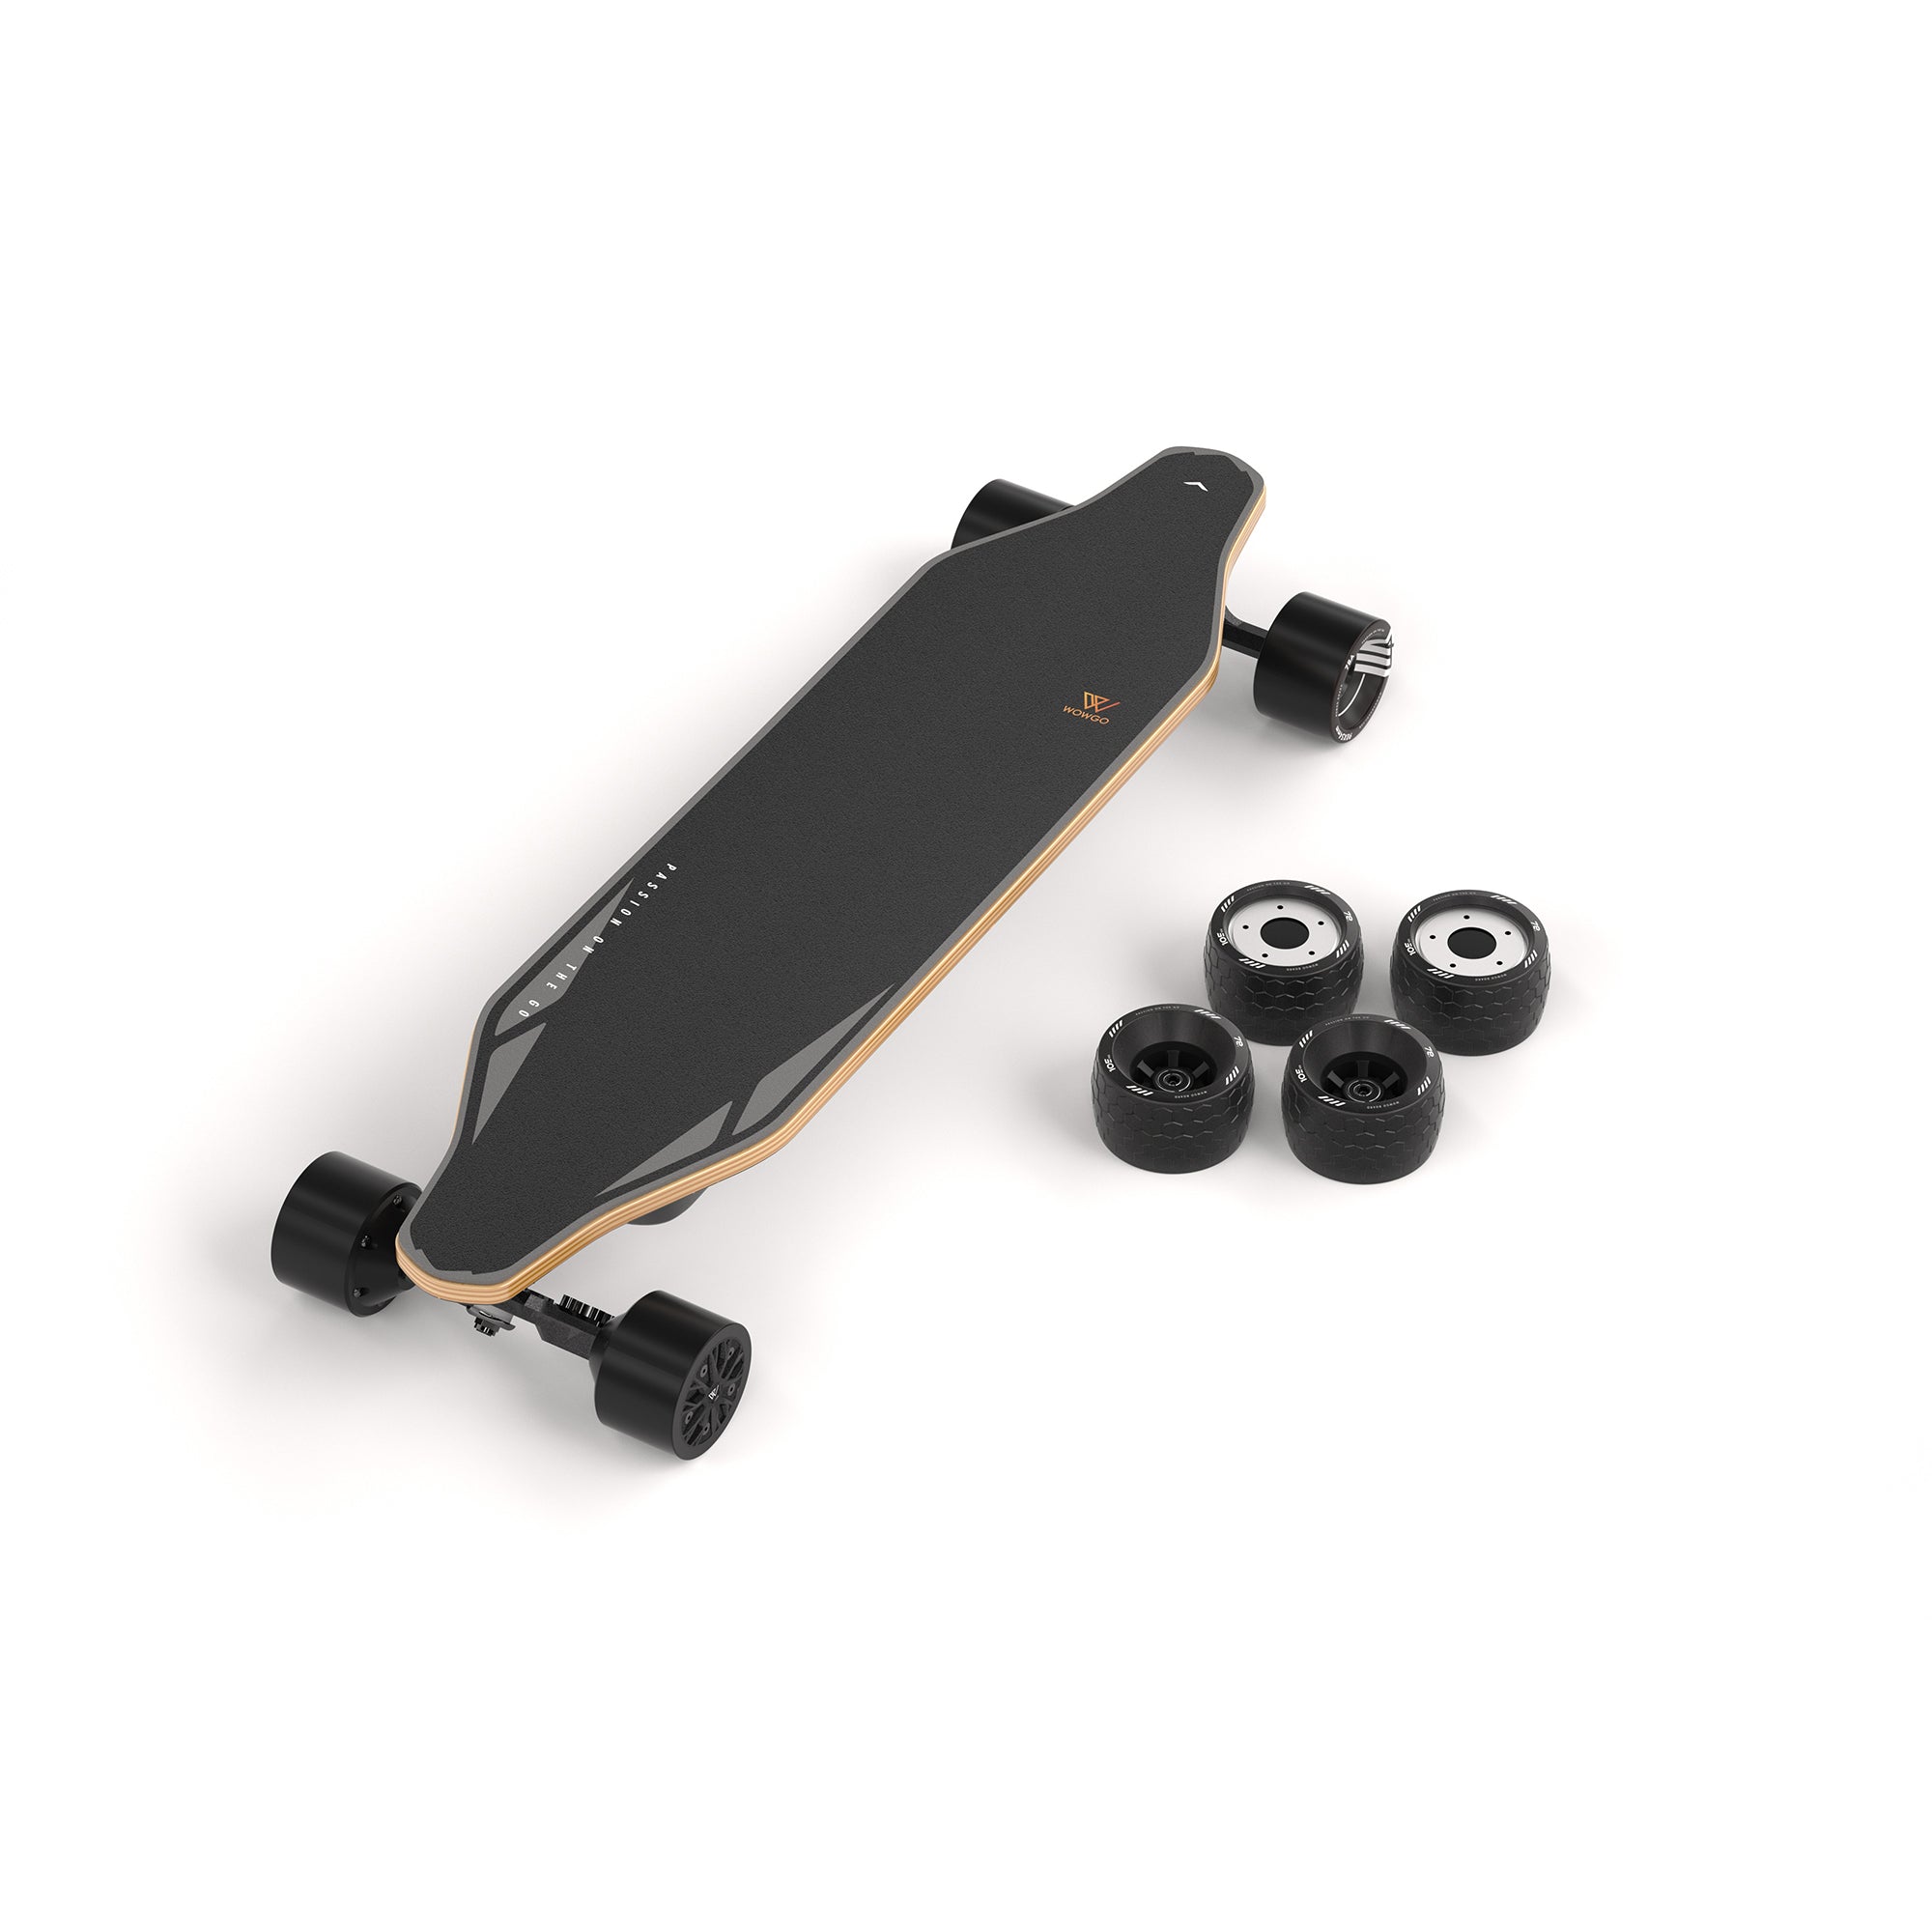 Wowgo 2S MAX - 2 IN 1 Electric Skateboard